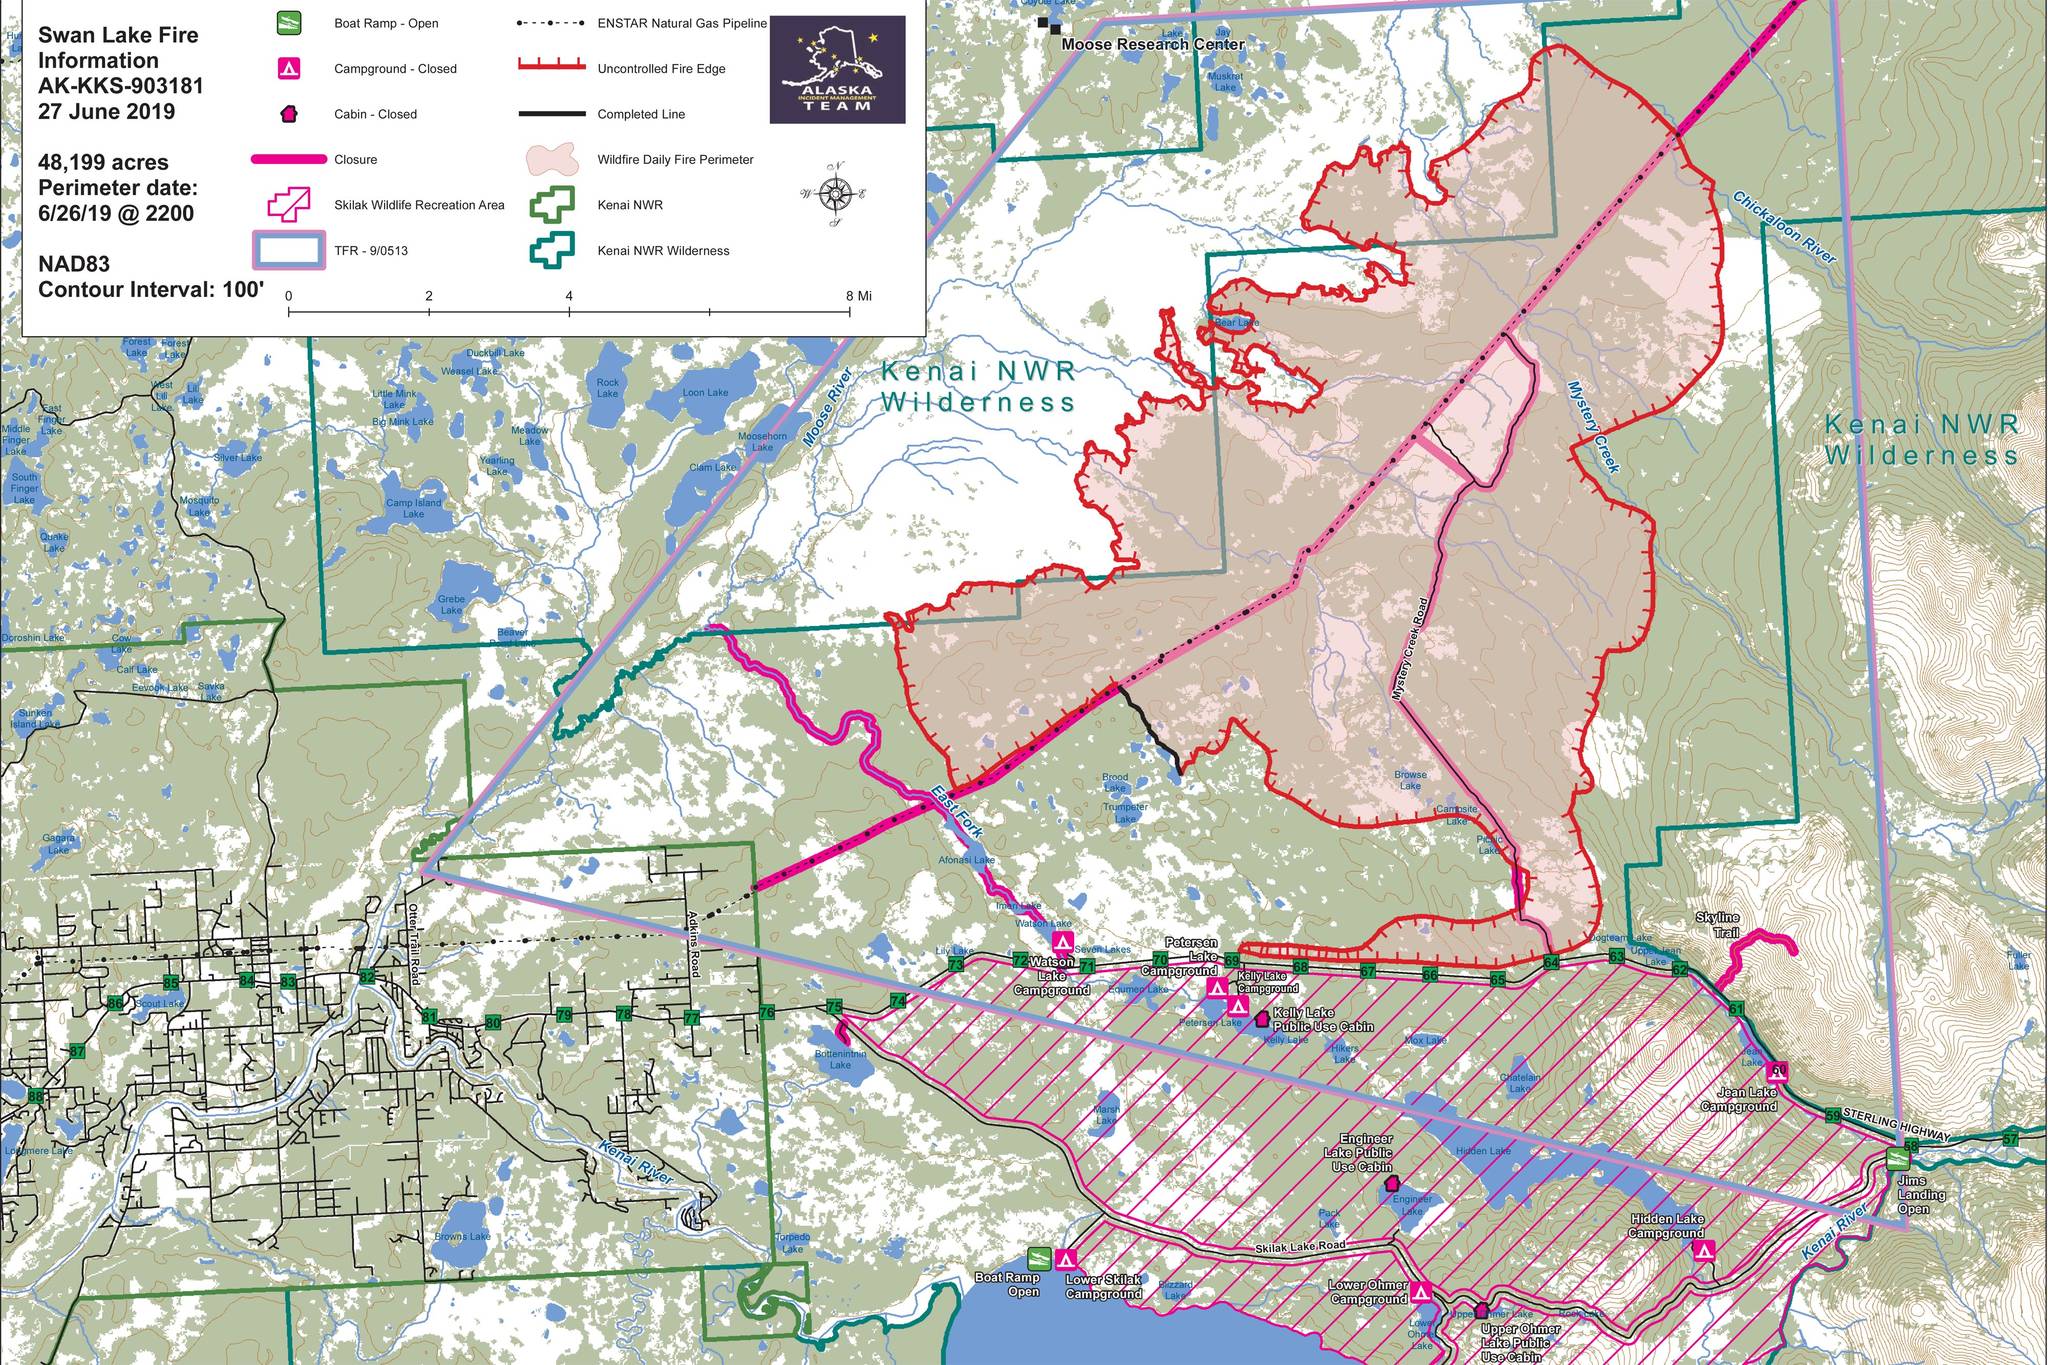 The map of the Swan Lake Fire in the Kenai National Wildlife Refuge as of June 27, 2019. (Courtesy Alaska Interagency Incident Management Team)